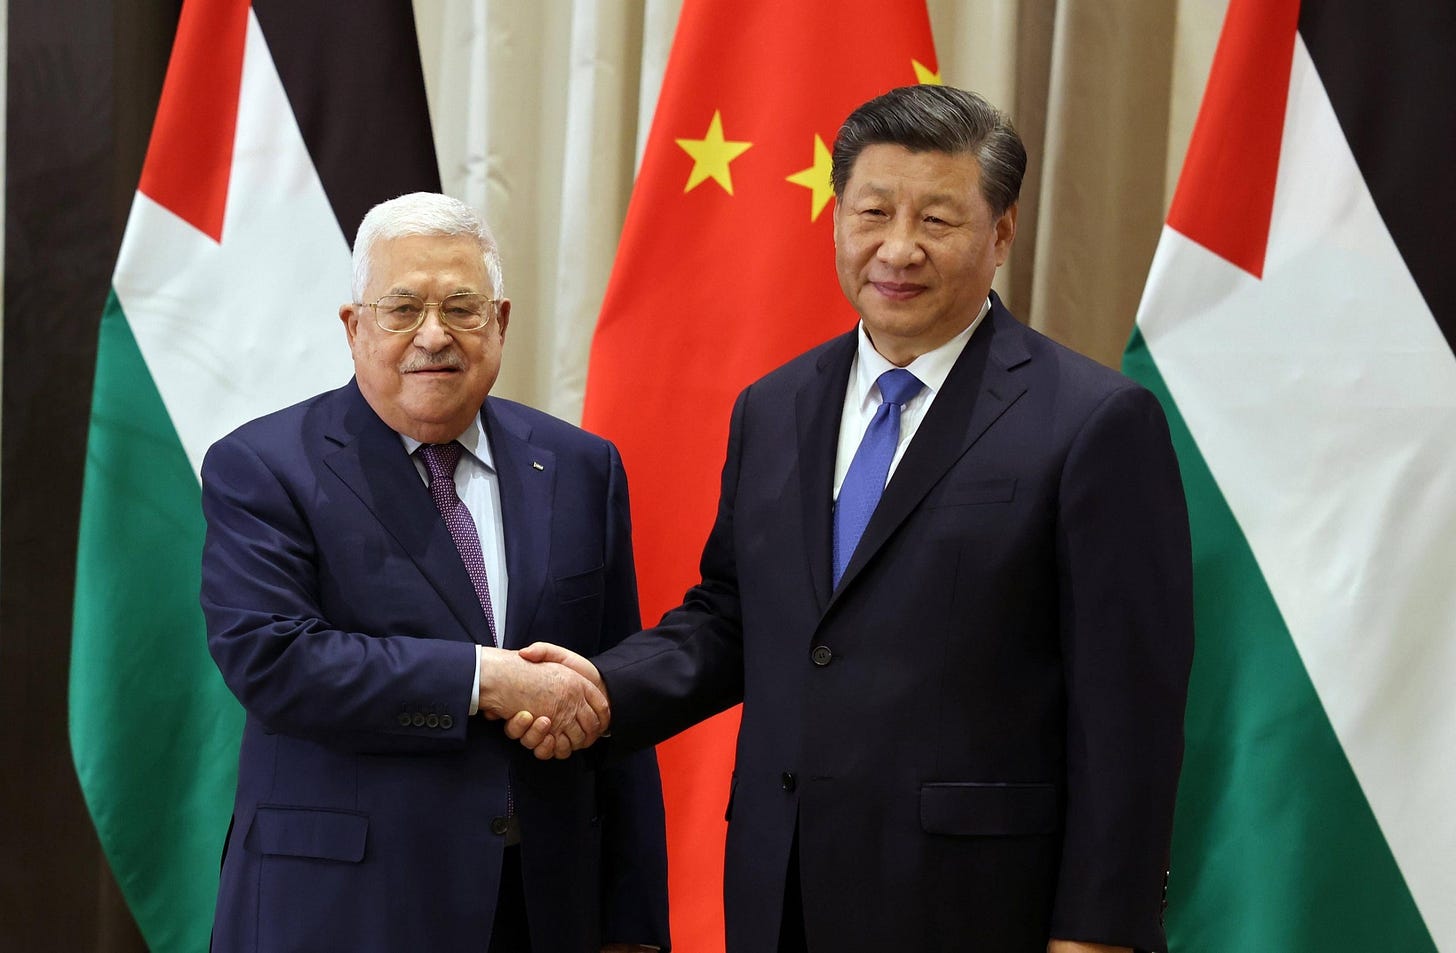 Chinese President Xi and Palestinian Authority Chairman Mahmoud Abbas | 